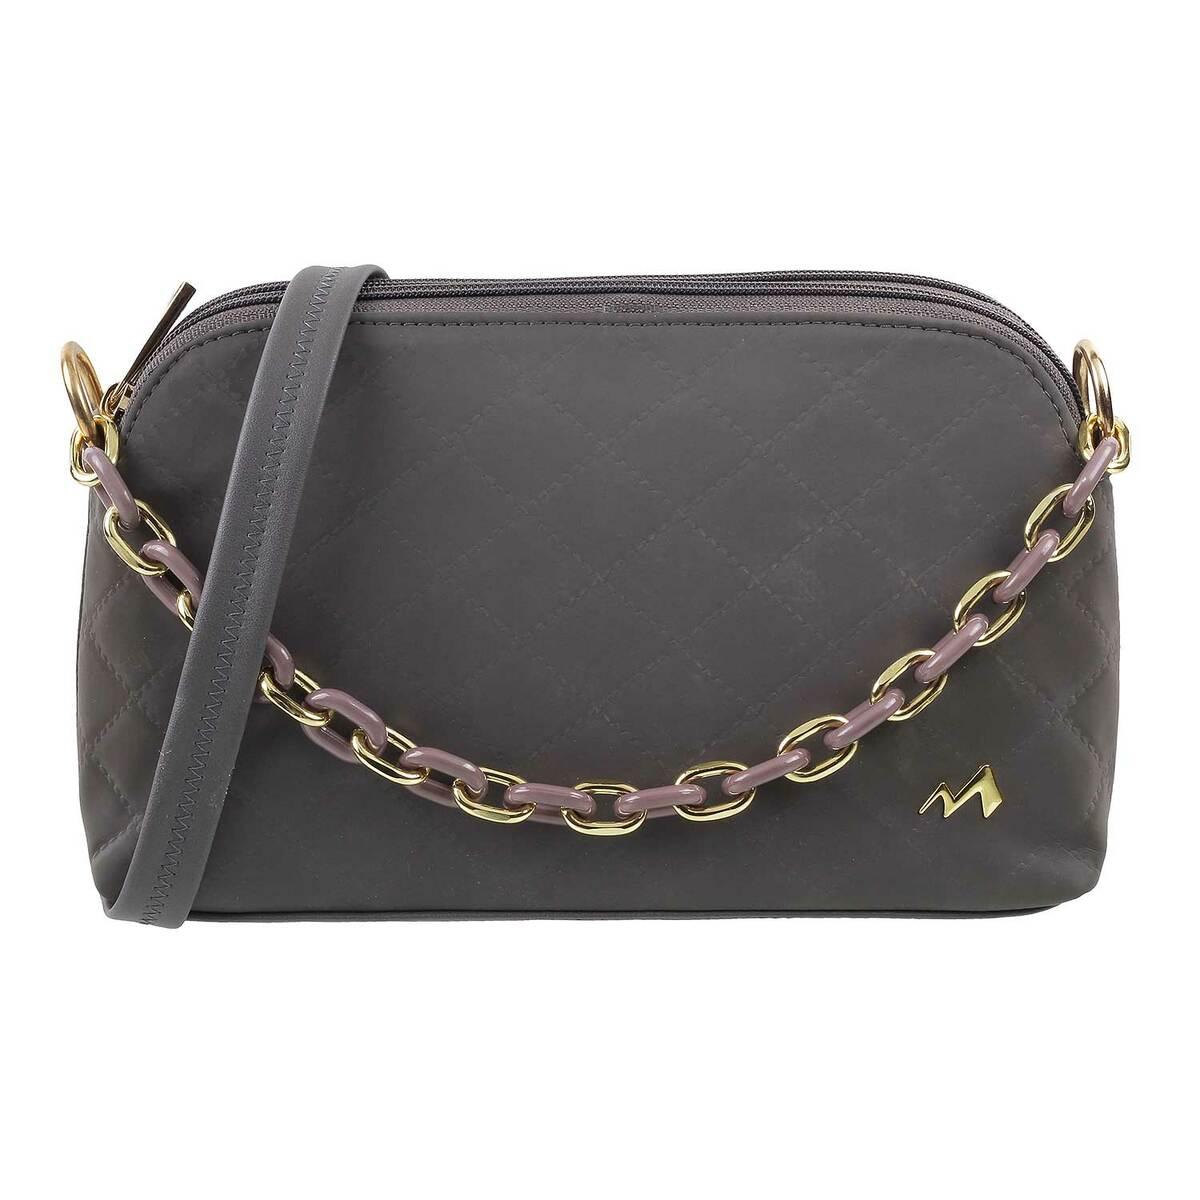 Grey Women Sling Bag Price in India Full Specifications  Offers   DTashioncom